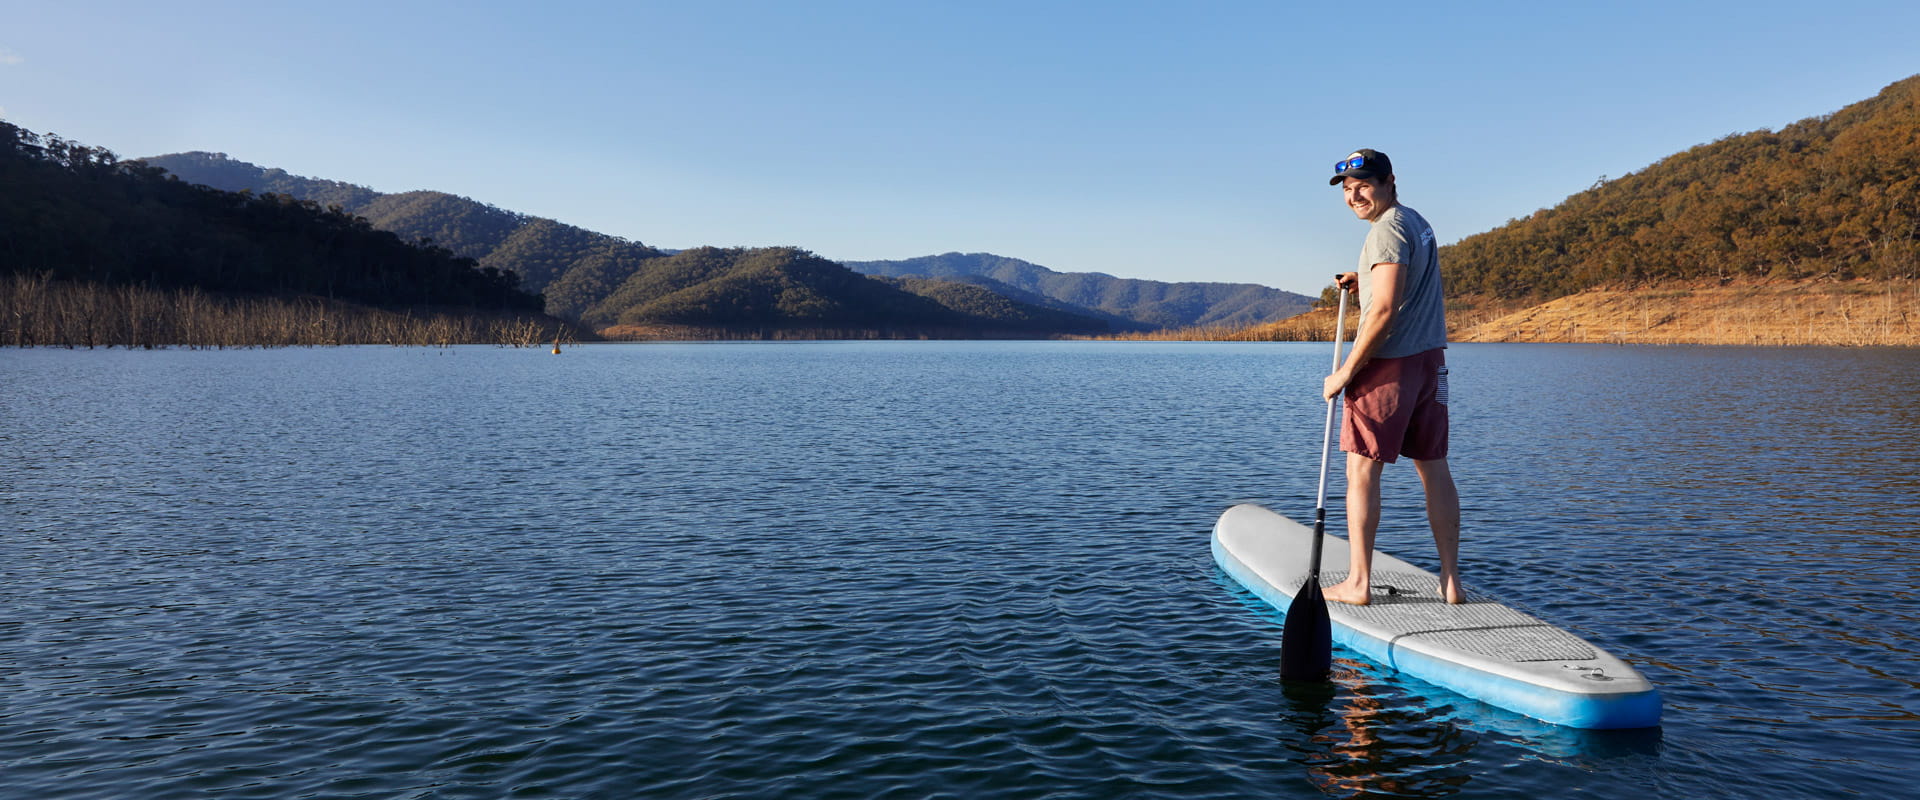 A man floats in the middle of a large blue lake on top of a stand up paddle board.